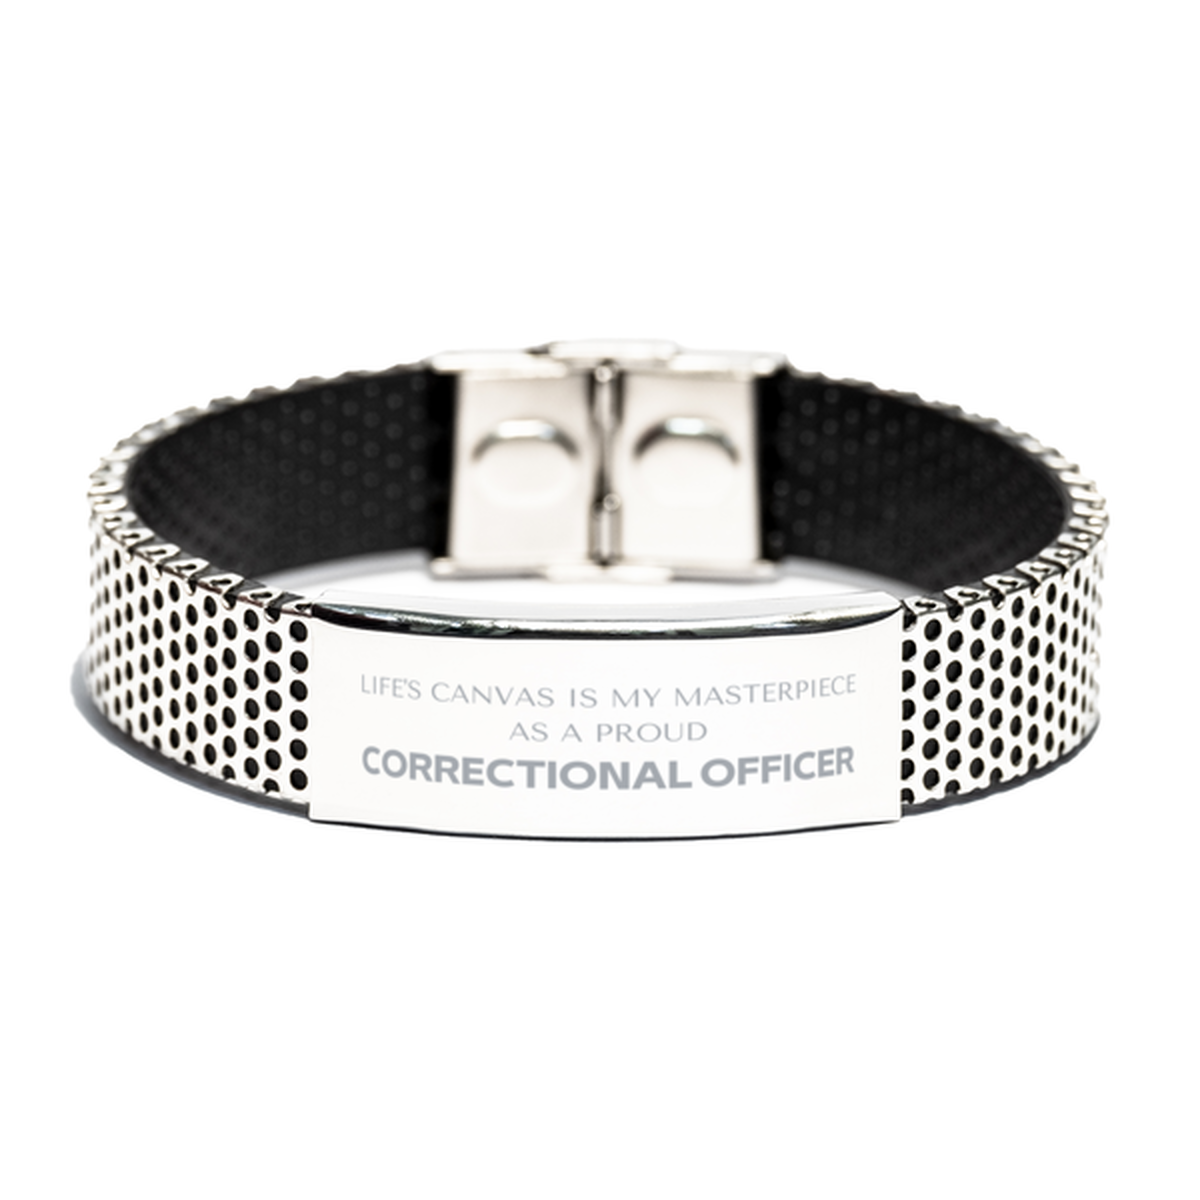 Proud Correctional Officer Gifts, Life's canvas is my masterpiece, Epic Birthday Christmas Unique Stainless Steel Bracelet For Correctional Officer, Coworkers, Men, Women, Friends